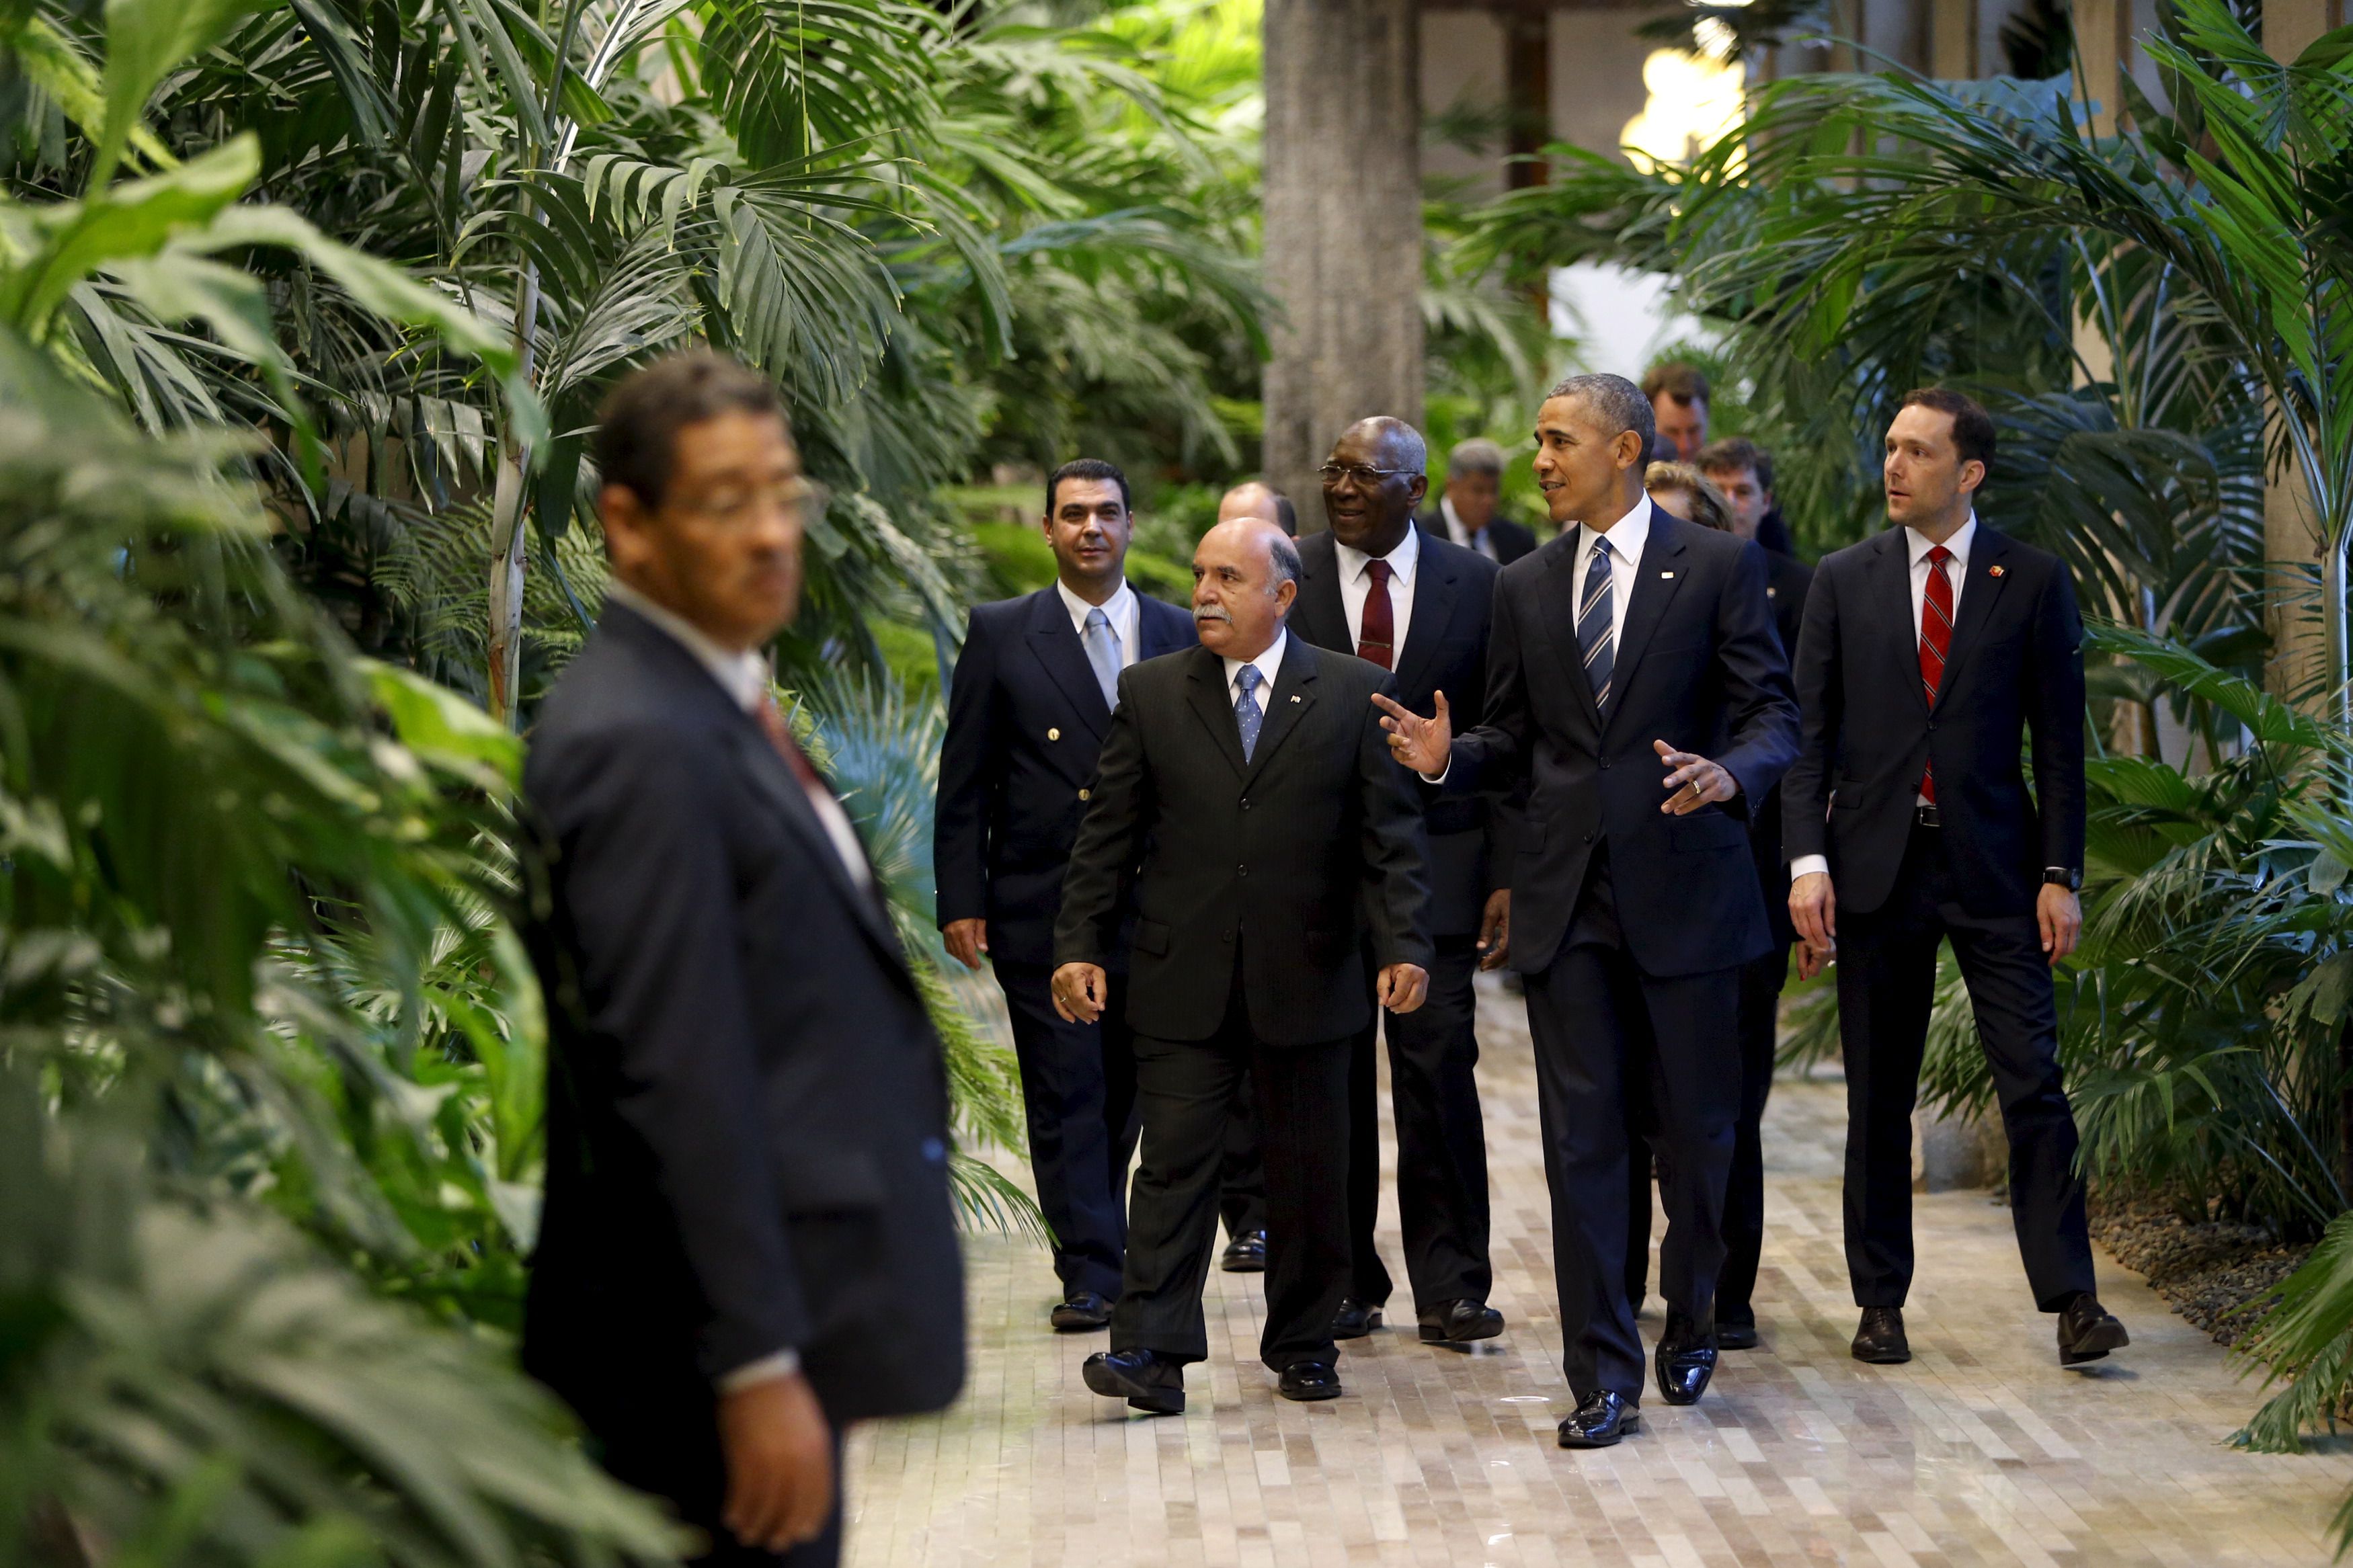 U.S. President Barack Obama (2nd R) arrives with a diplomatic entourage to greet Cuban President Raul Castro (not pictured) at the Palacio de la Revolucion in Havana March 21, 2016. REUTERS/Jonathan Ernst - RTSBHZX